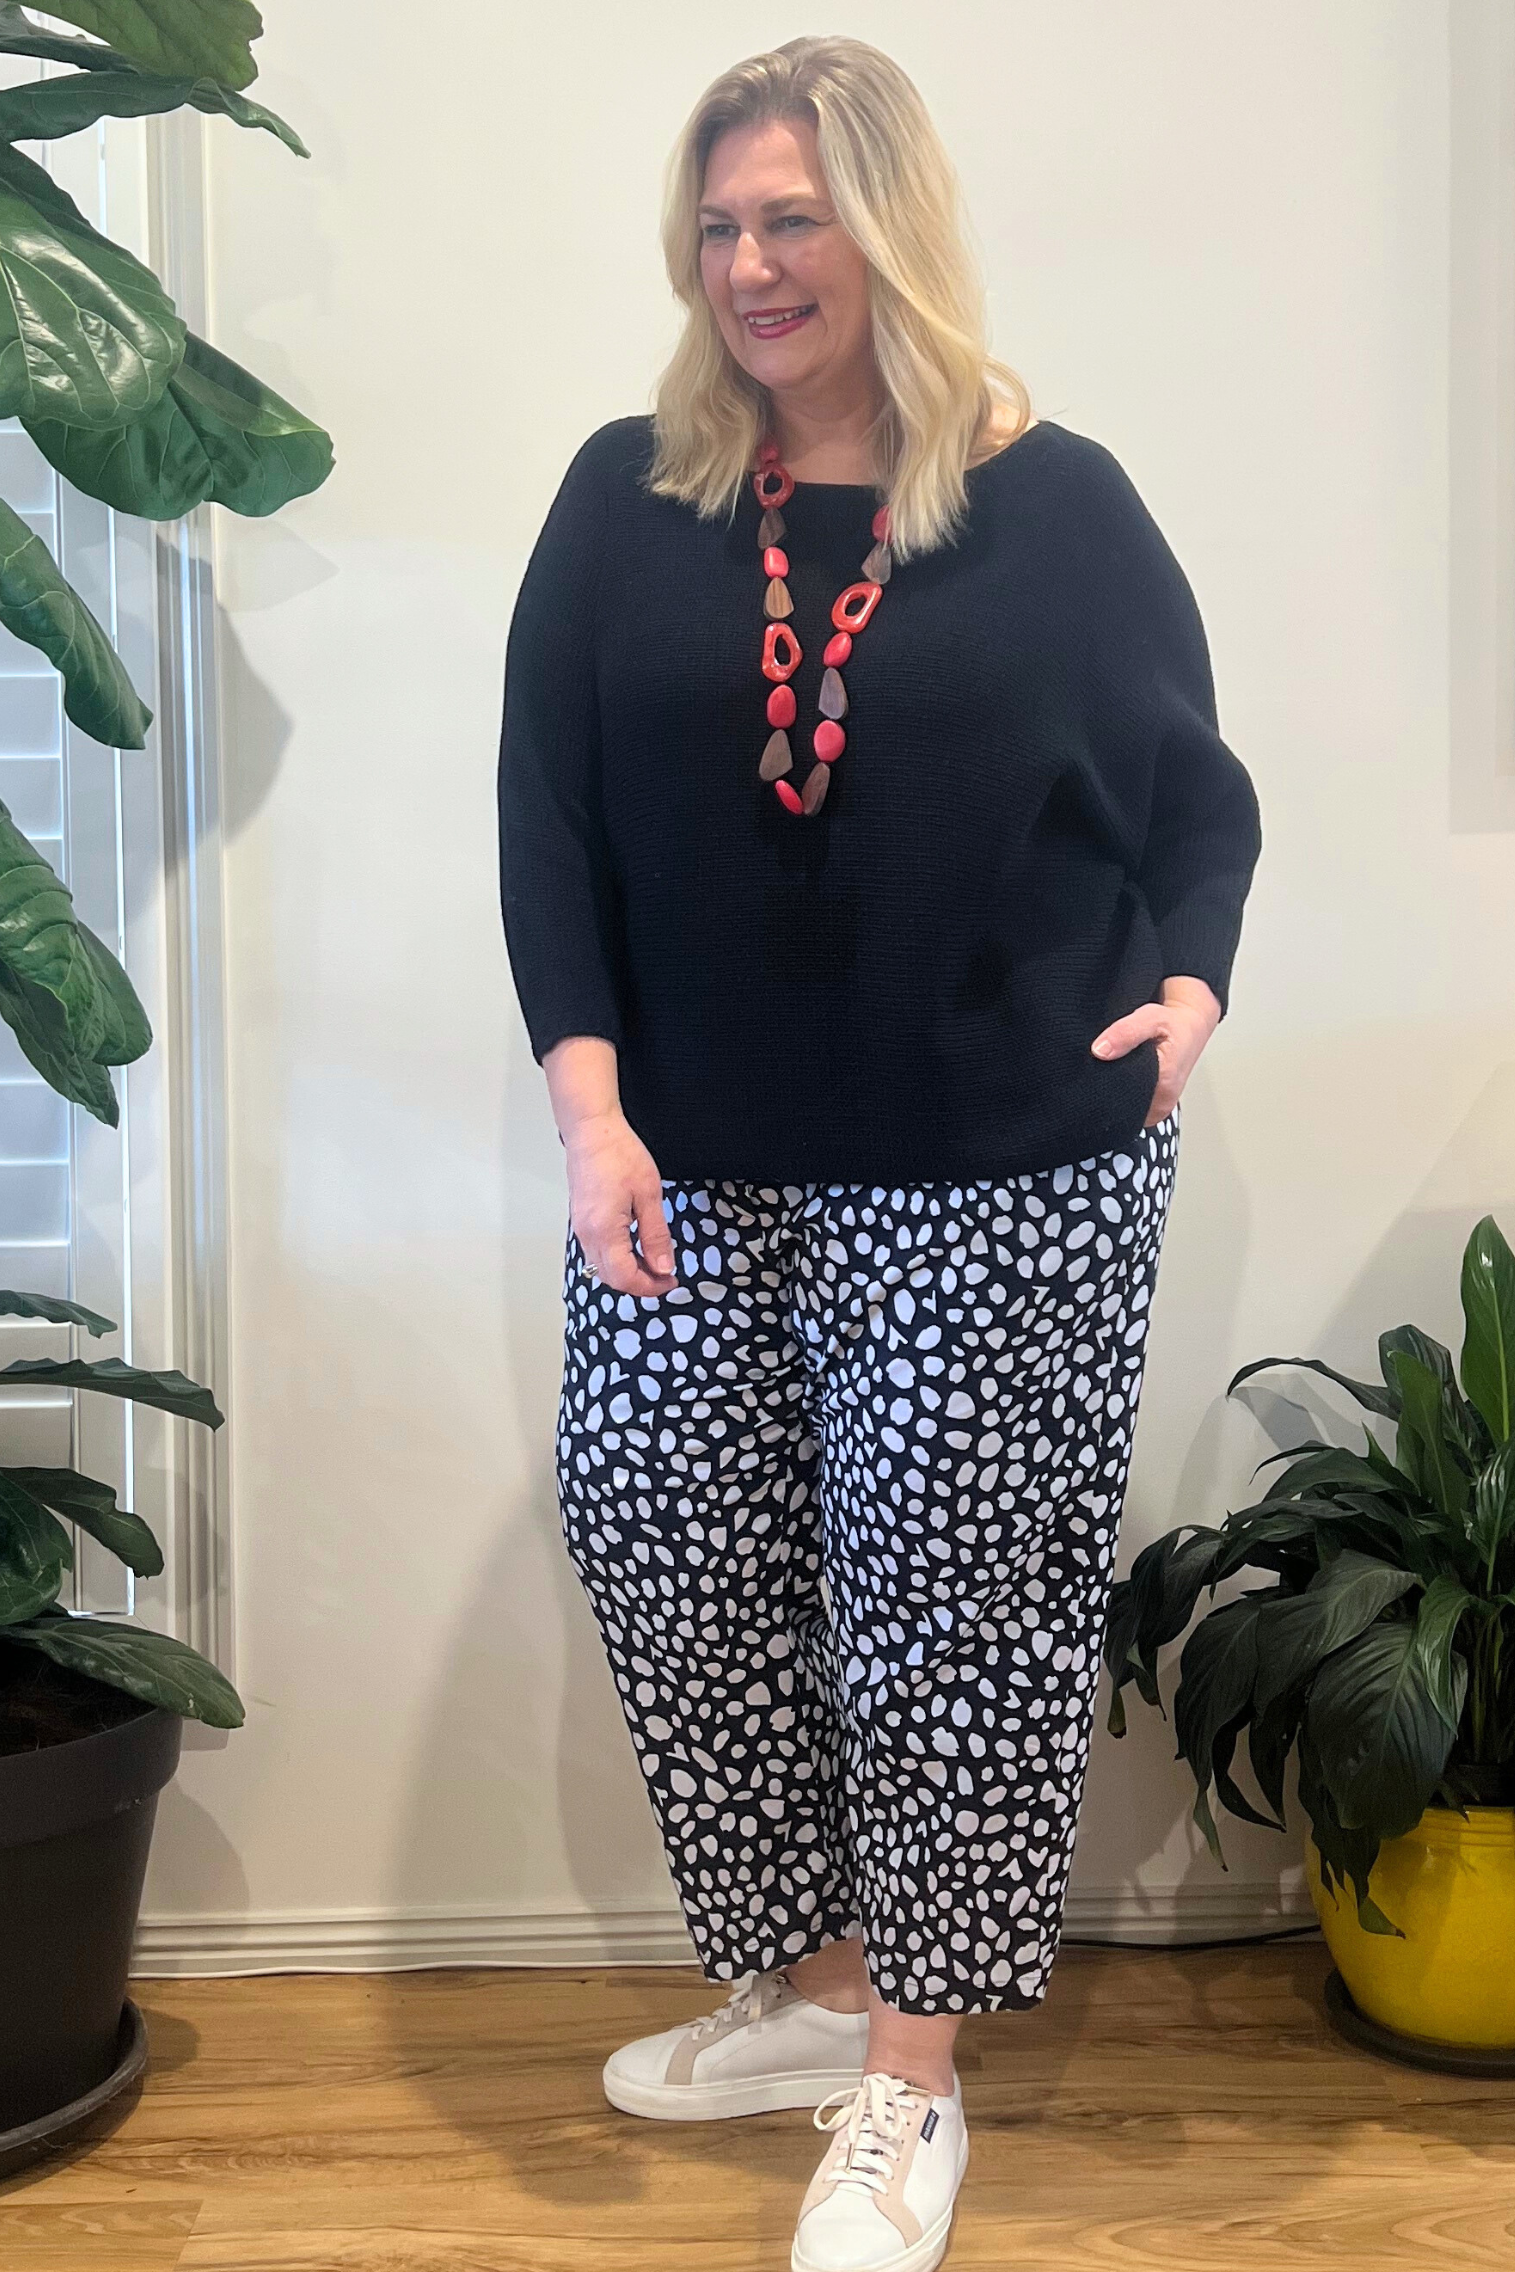 Kita Ku modelling a black and white spotted Pant Port with a black jumper and set indoors.